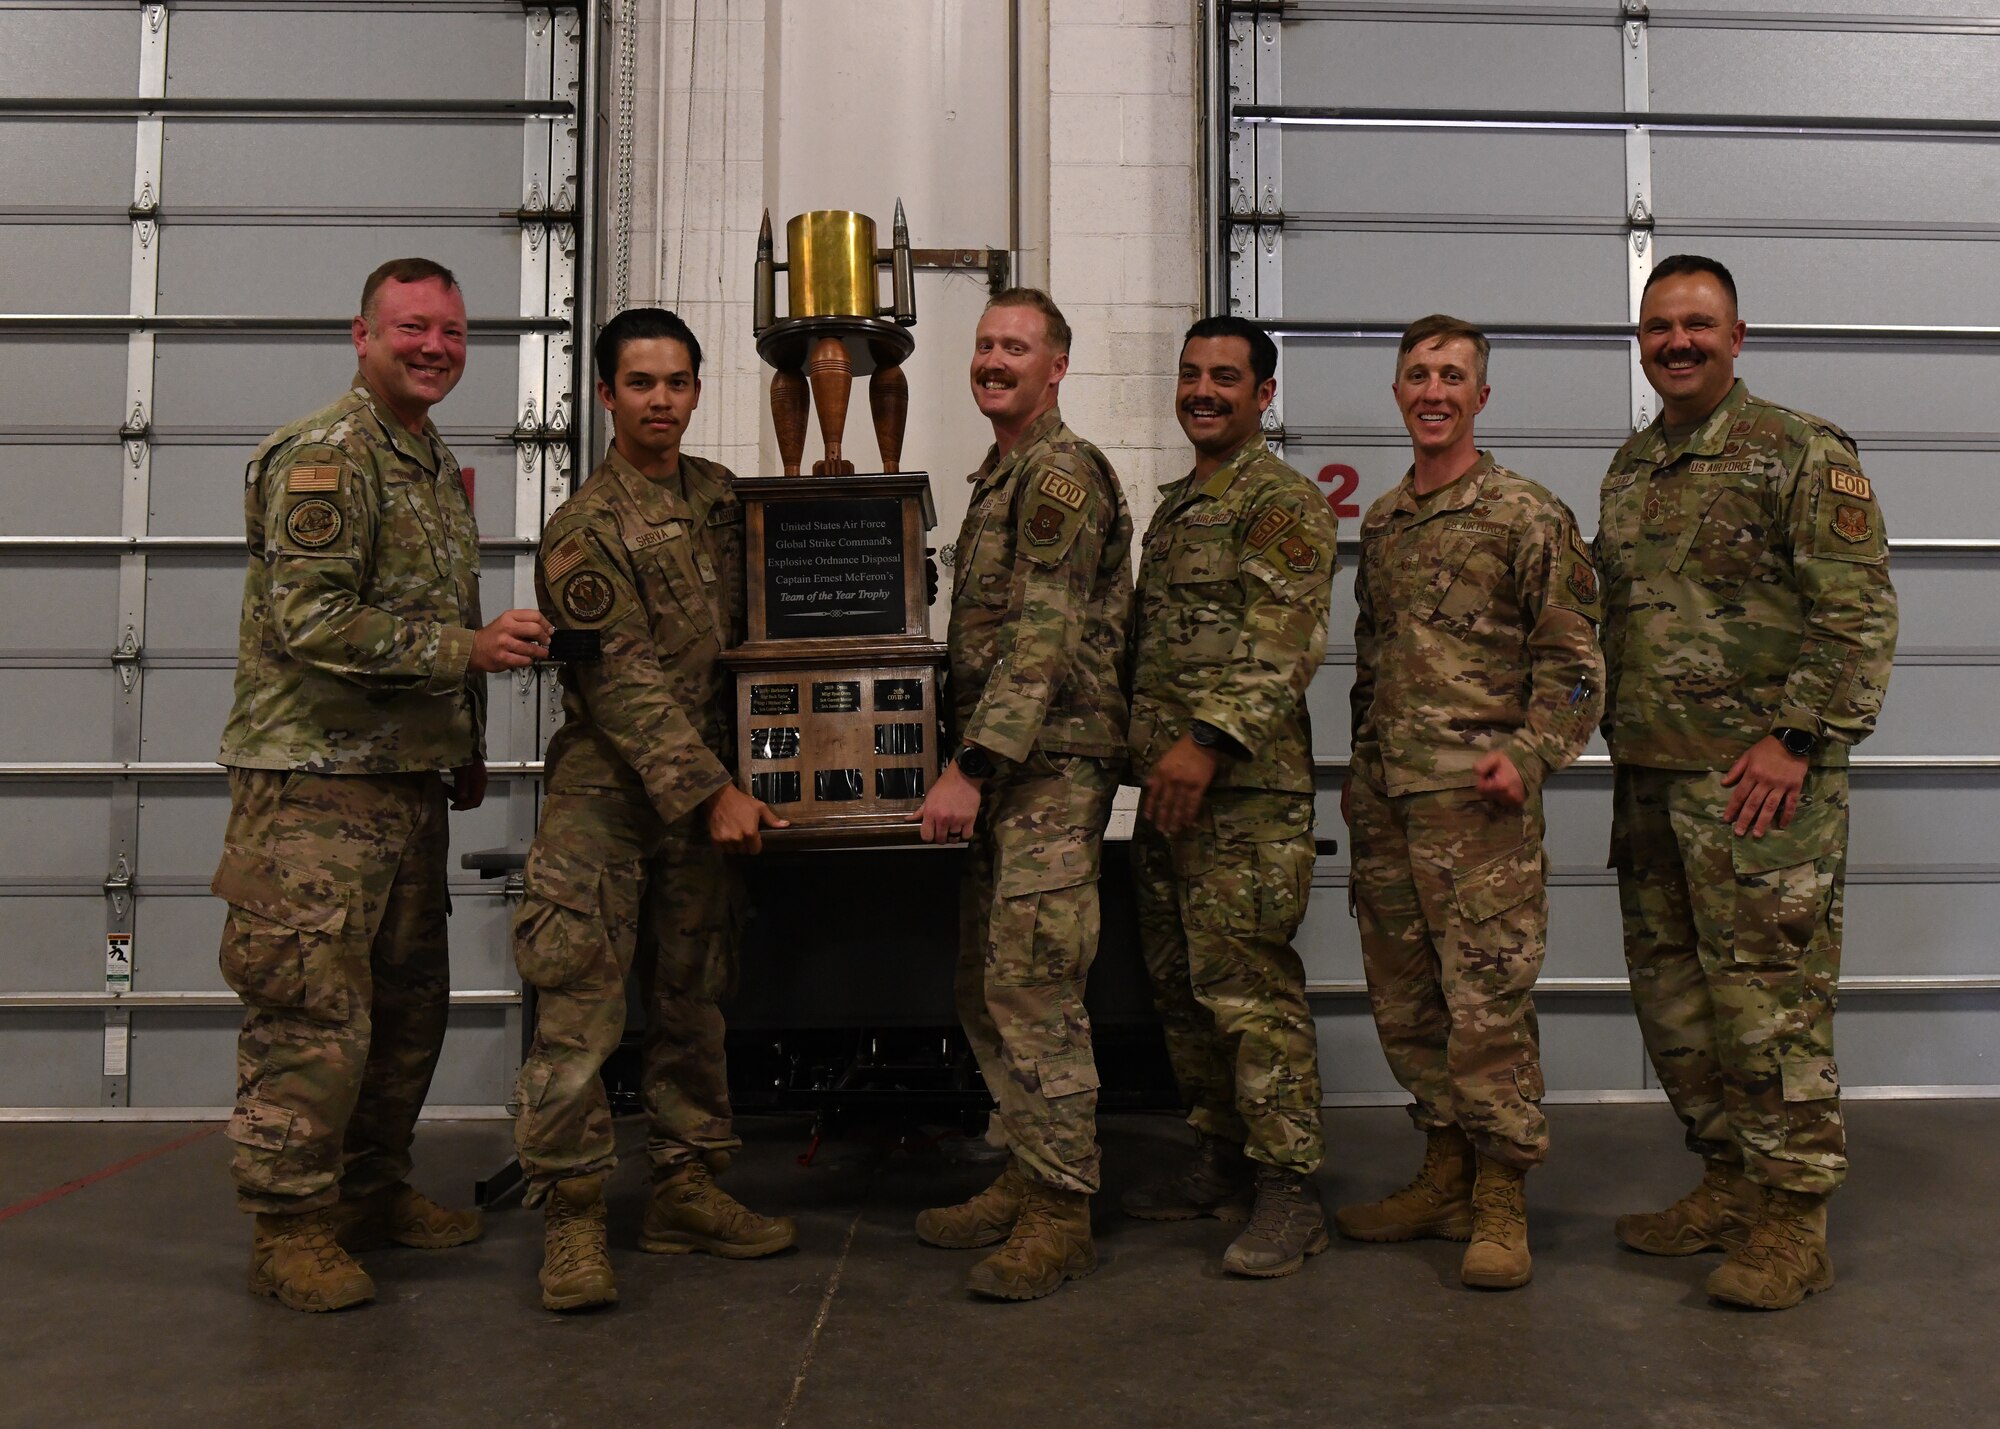 Members from the 5th Civil Engineer Squadrons Explosive Ordinance Disposal team receive the Explosive Ordinance Team of the Year Trophy during the EOD best of best competition on F.E. Warren Air Force Base, Wyoming, June 30, 2022. The best of best competition allowed for teams from multiple Air Force bases to test their skill through various exercises with the top scoring team taking home the trophy. (U.S. Air Force photo by Airman 1st Class Darius Frazier.)